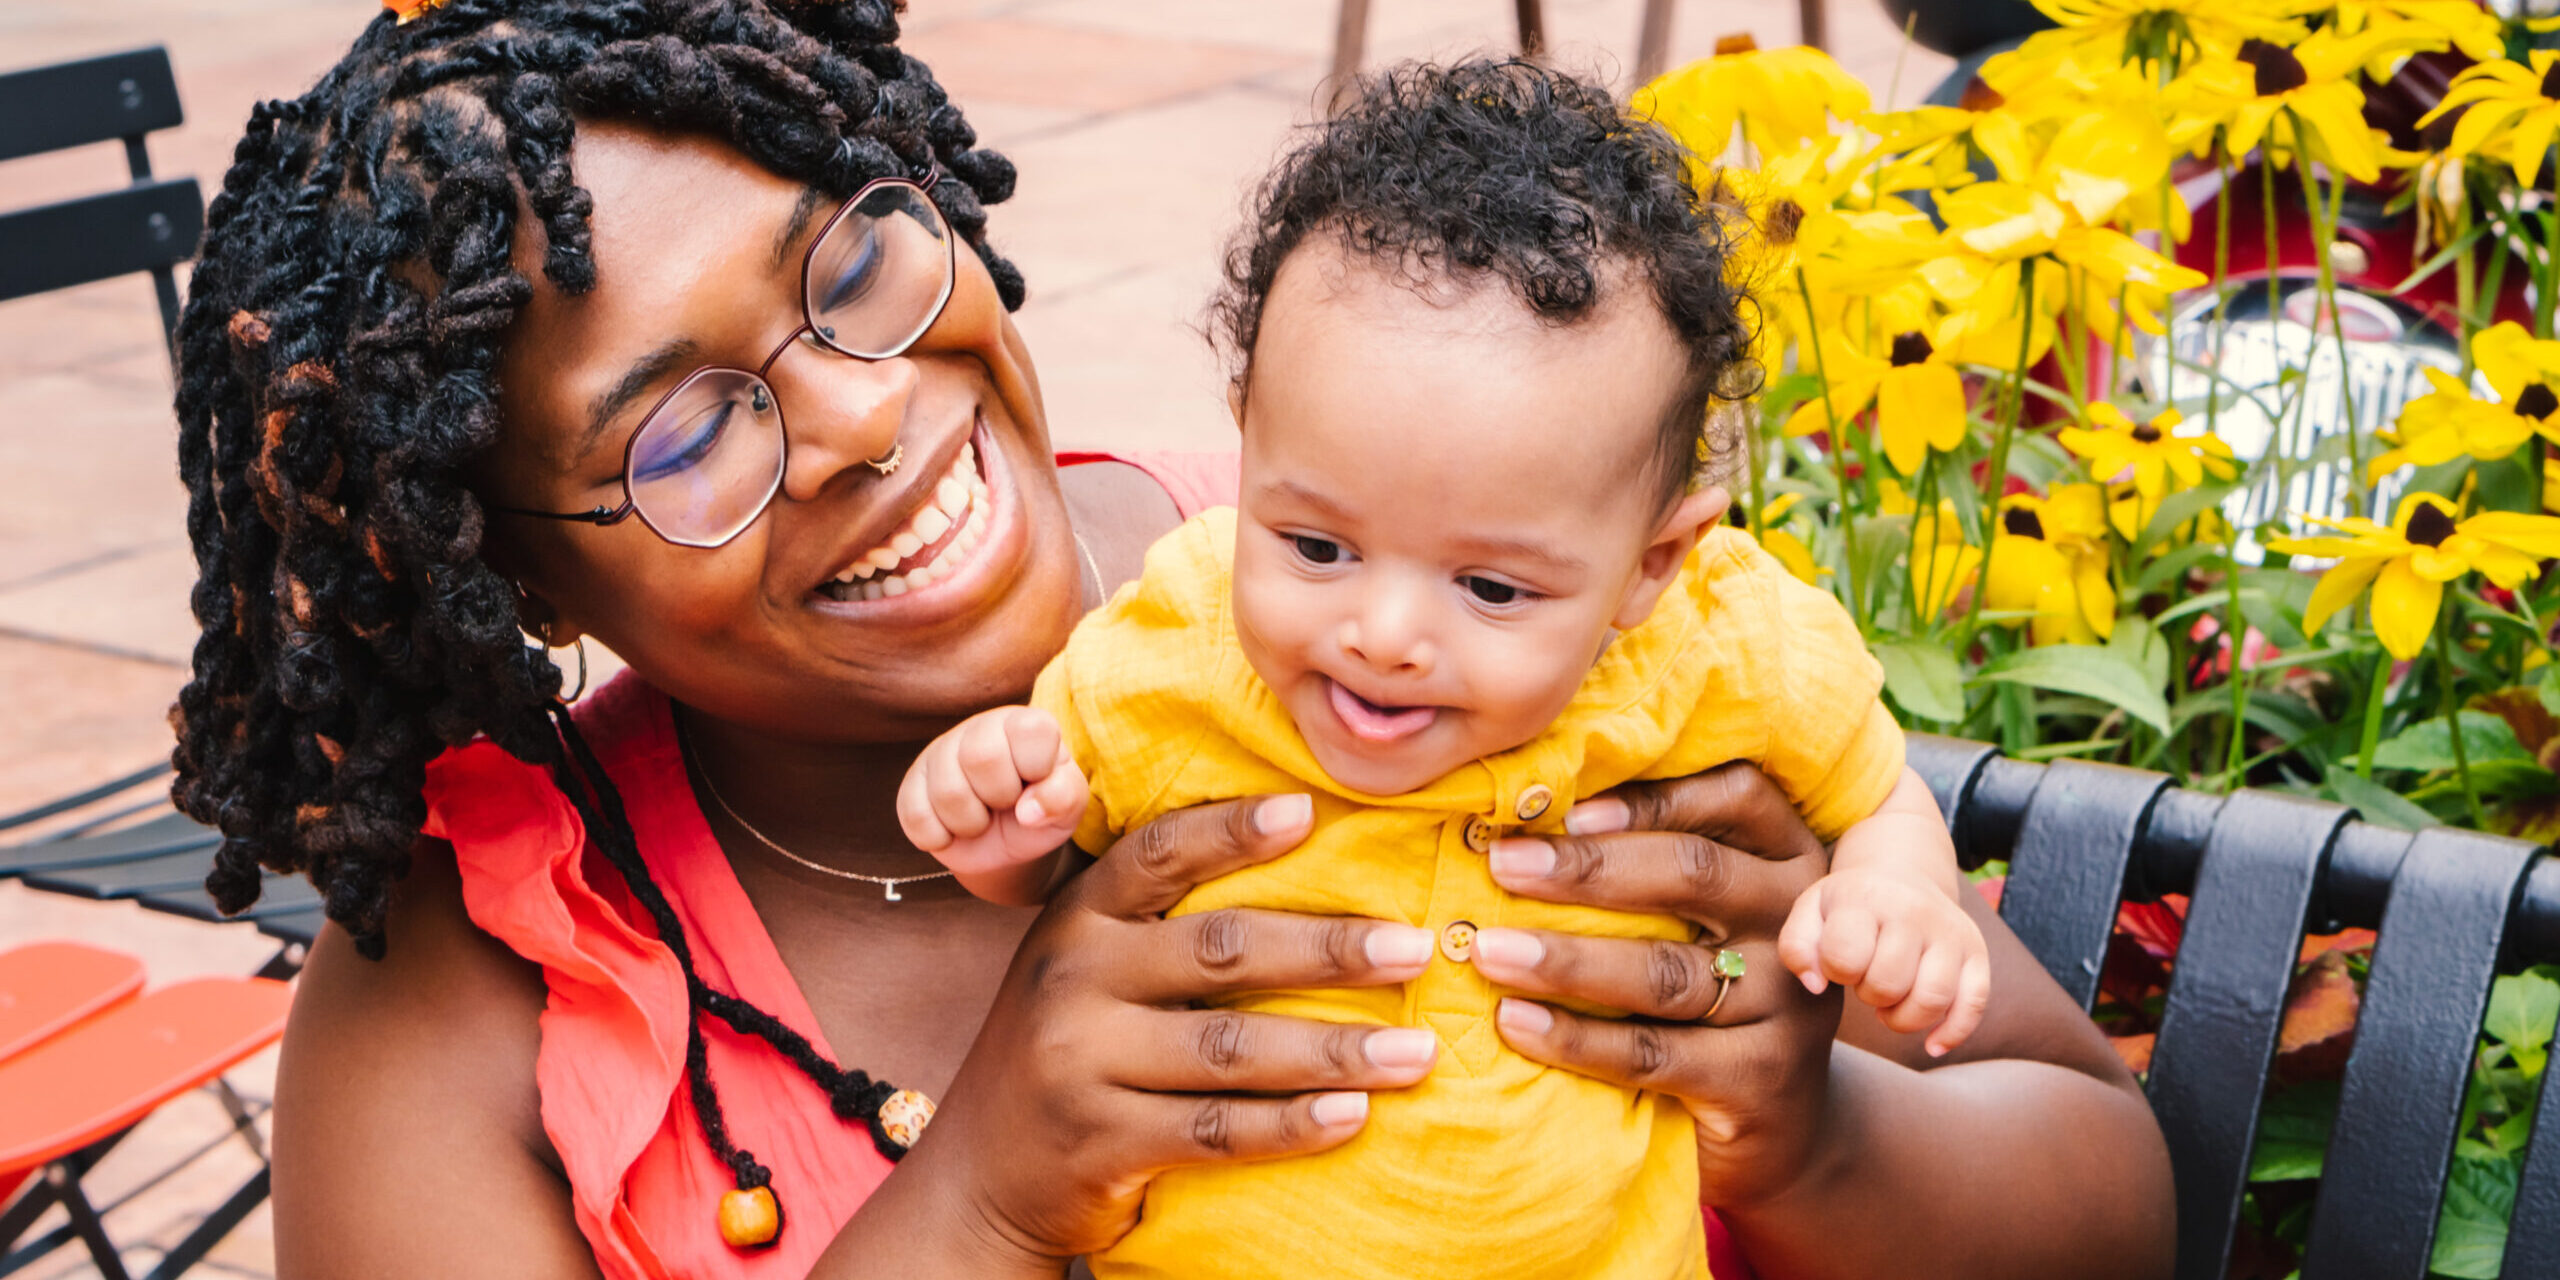 Black mother holding her baby wearing bright pink and yellow clothes sitting on a bench with flowers behind it.